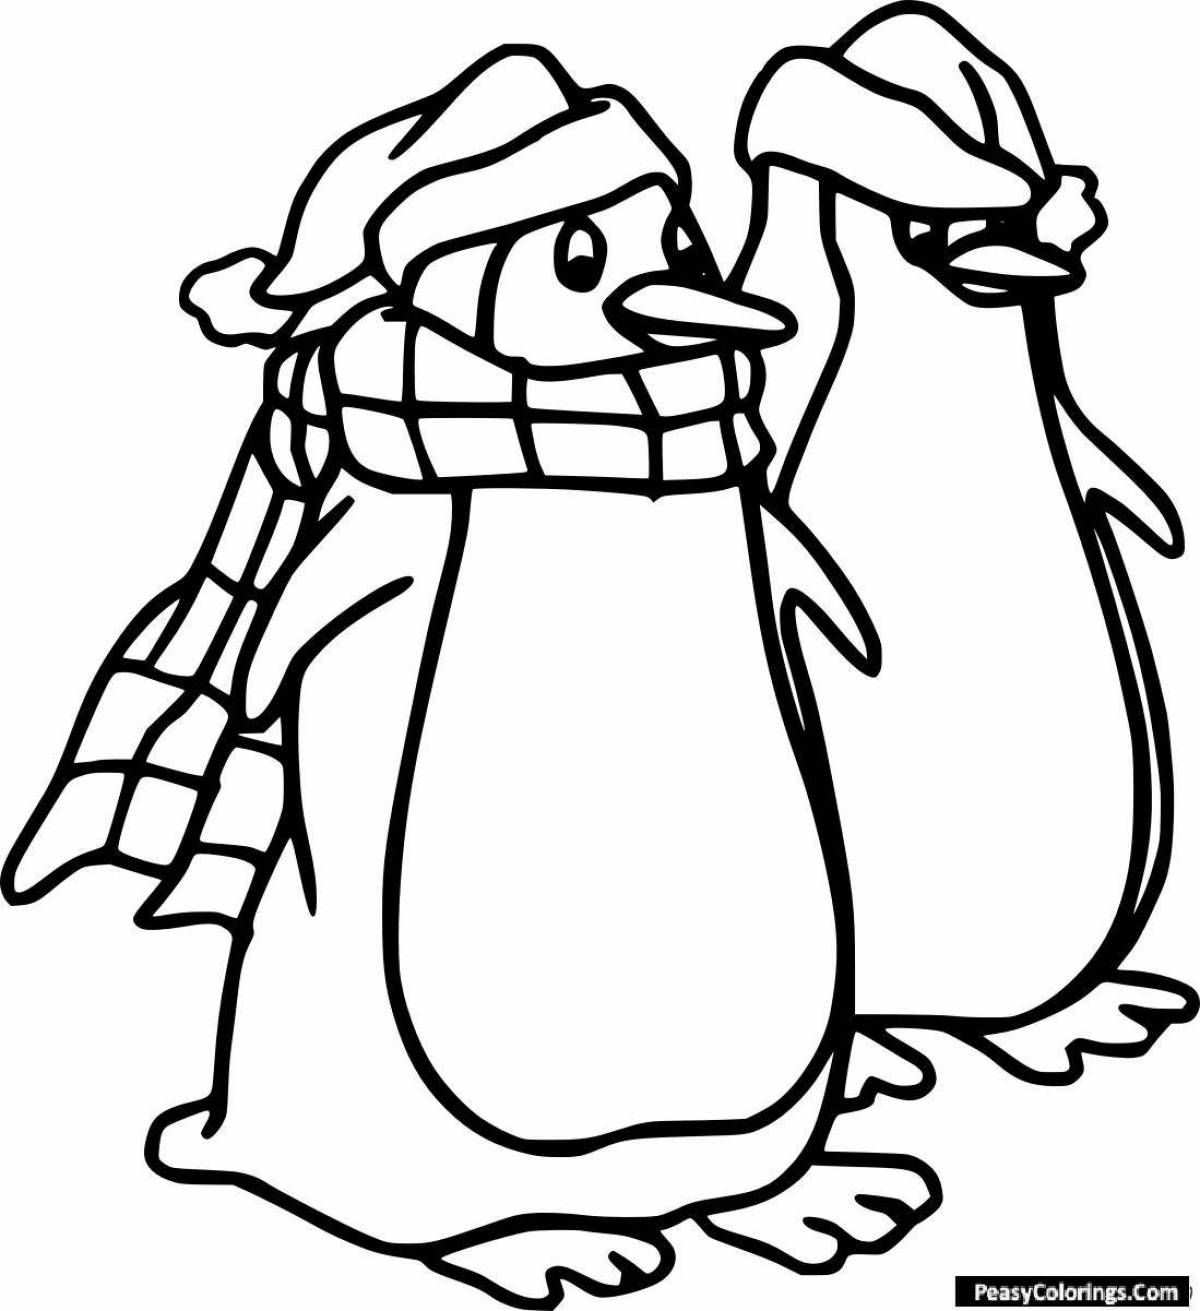 Fluffy penguin family coloring page